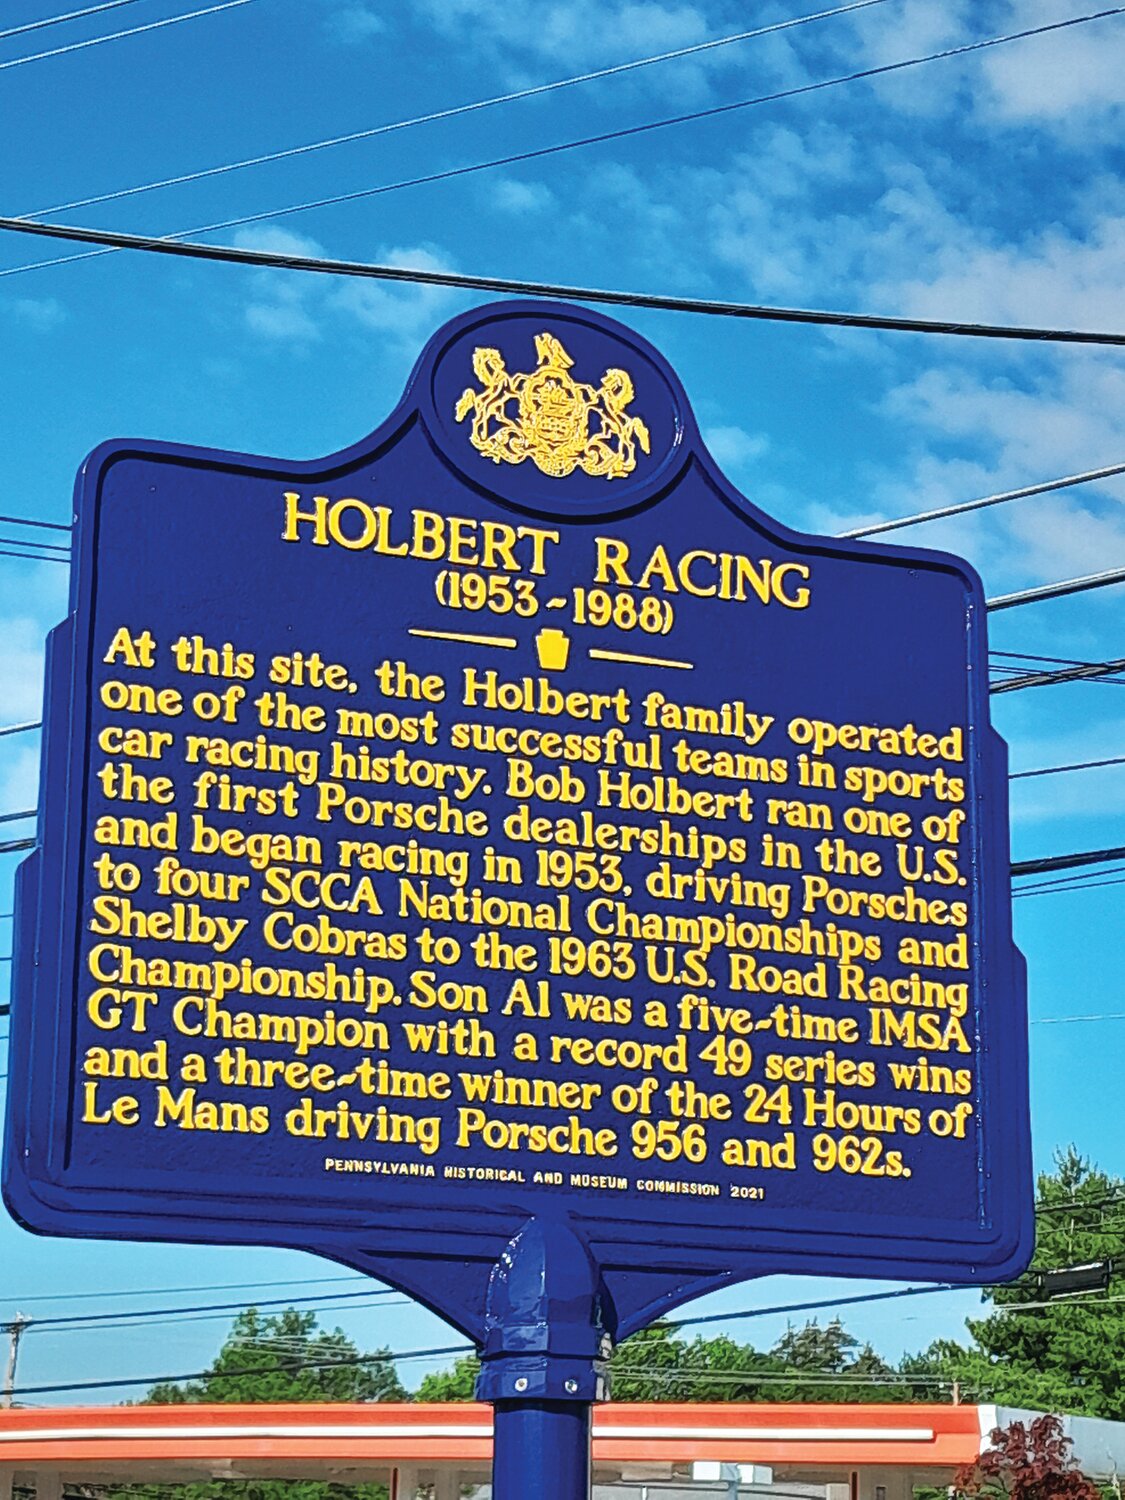 A blue and gold plaque near the intersection of 611 and Bristol Road pays homage to the Holbert family racing legacy.